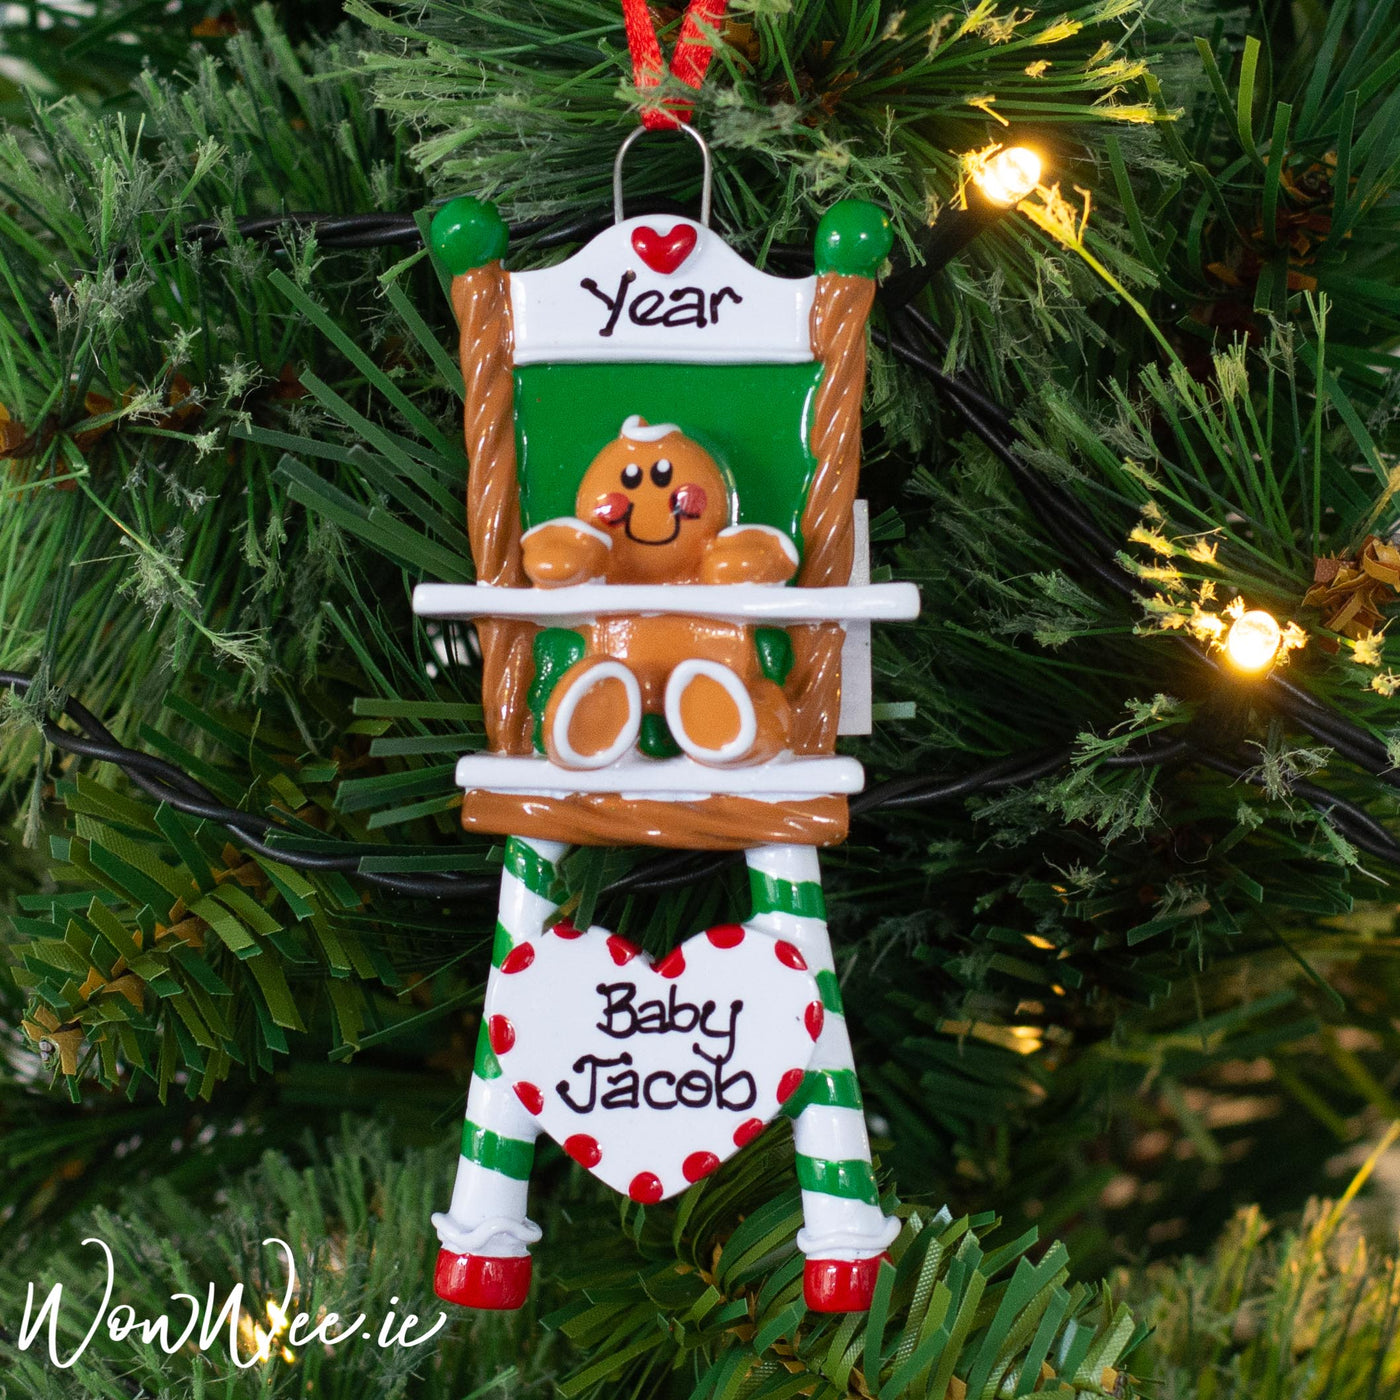 Personalised Christmas Ornament with names and dates for babys and little children to enjoy hanging on the Christmas Tree each year. 